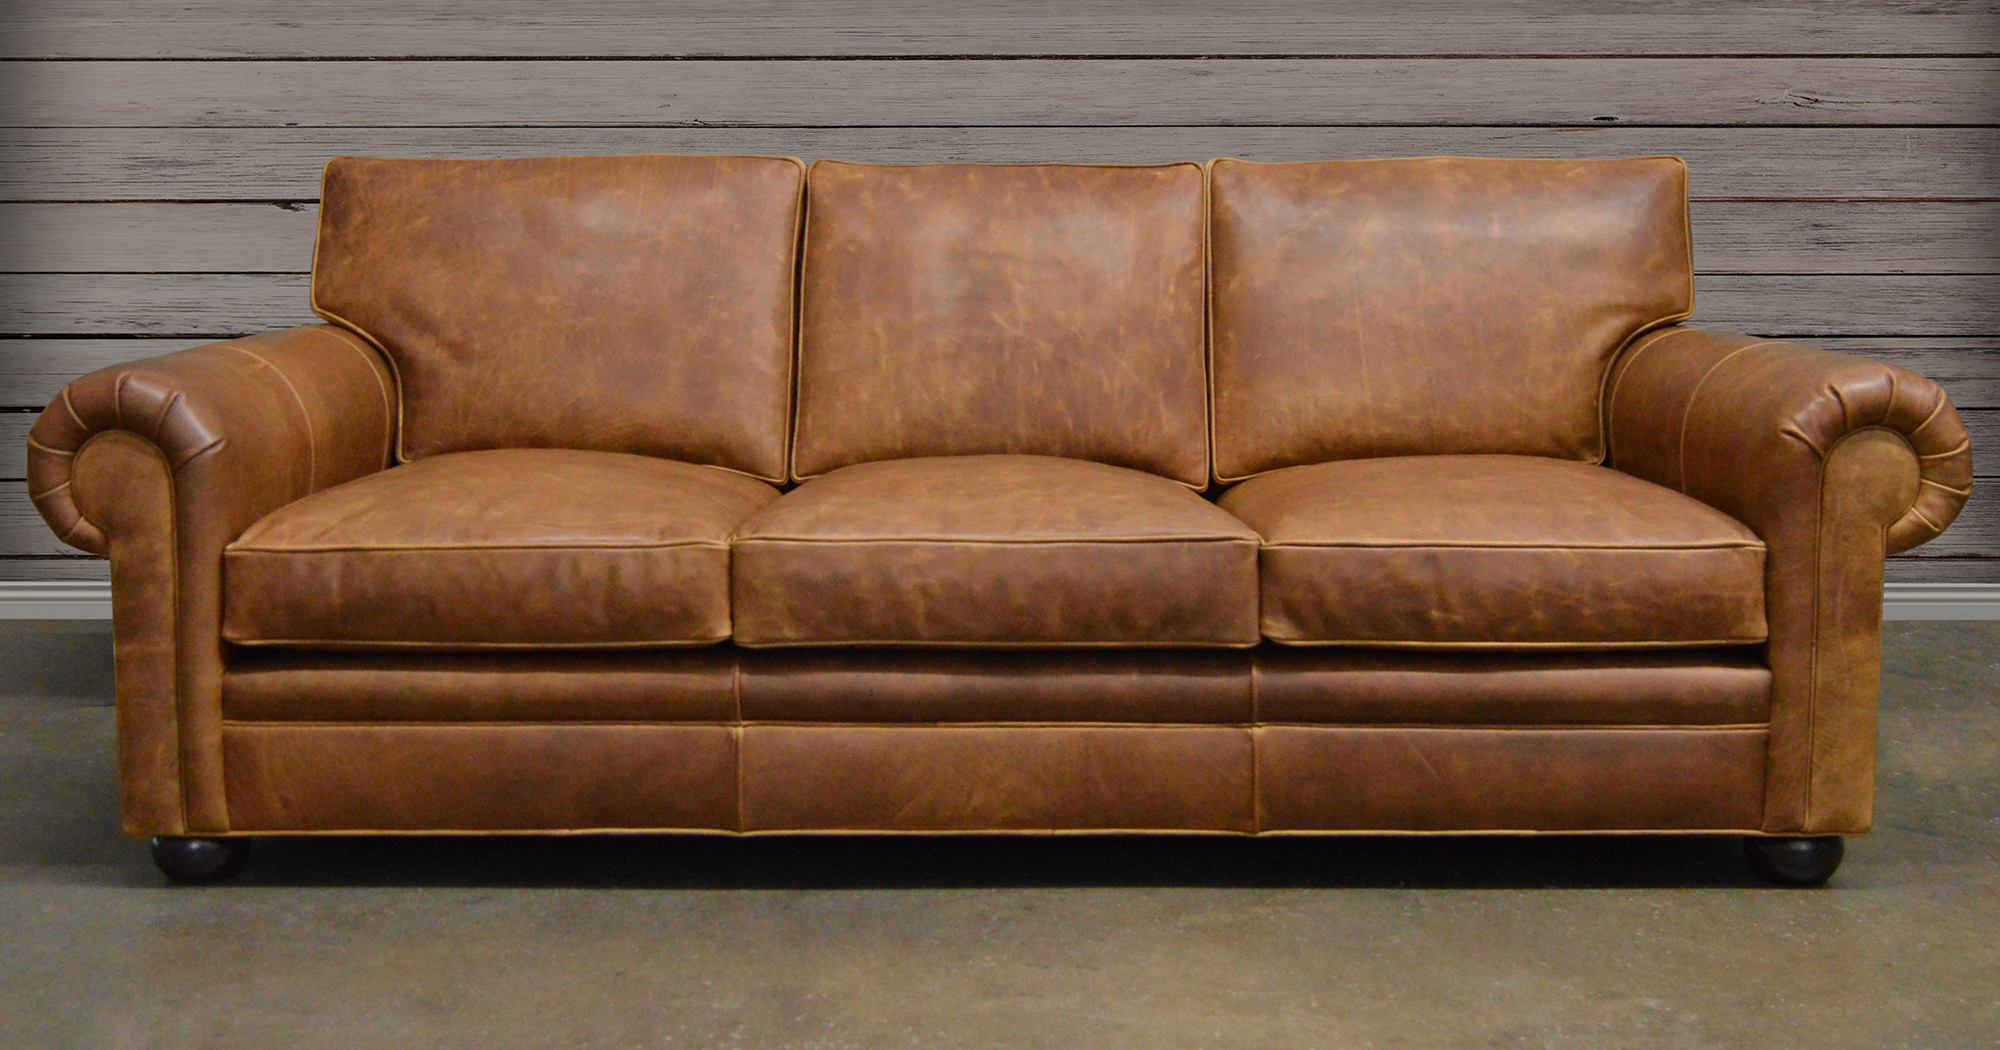 Full Grain Leather Sofa Visualhunt, Top Quality Leather Sofas